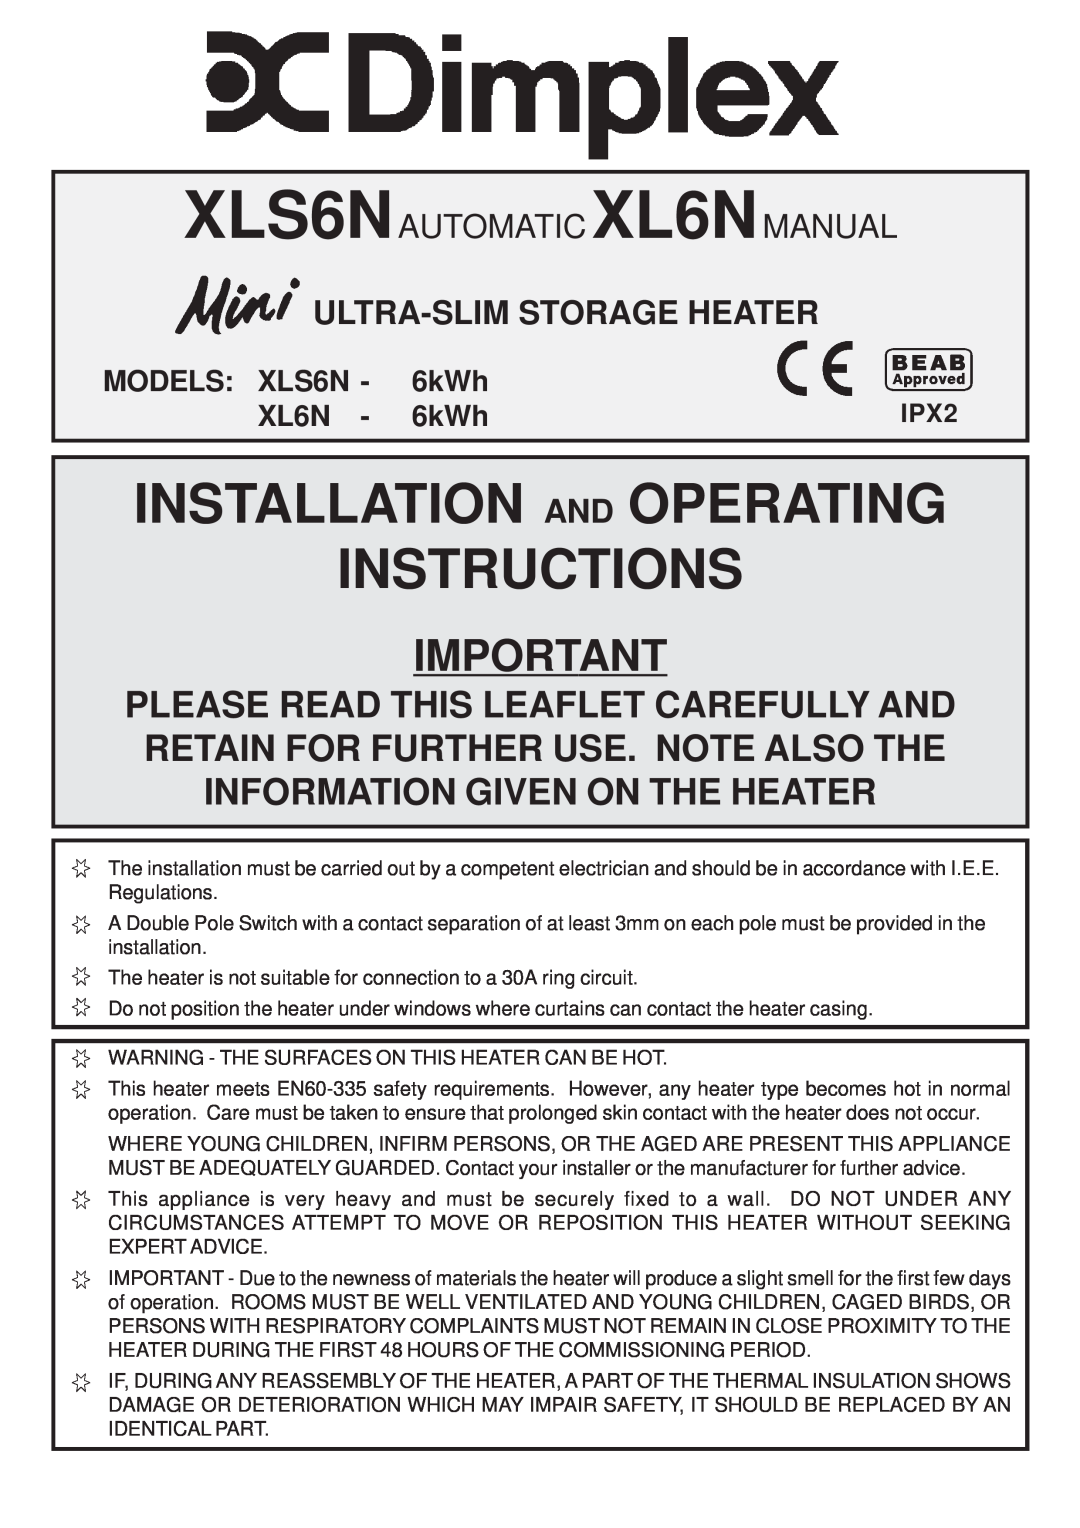 Dimplex XLS6N installation instructions Ultra-Slimstorage Heater, IPX2, Installation And Operating Instructions, 6kWh 